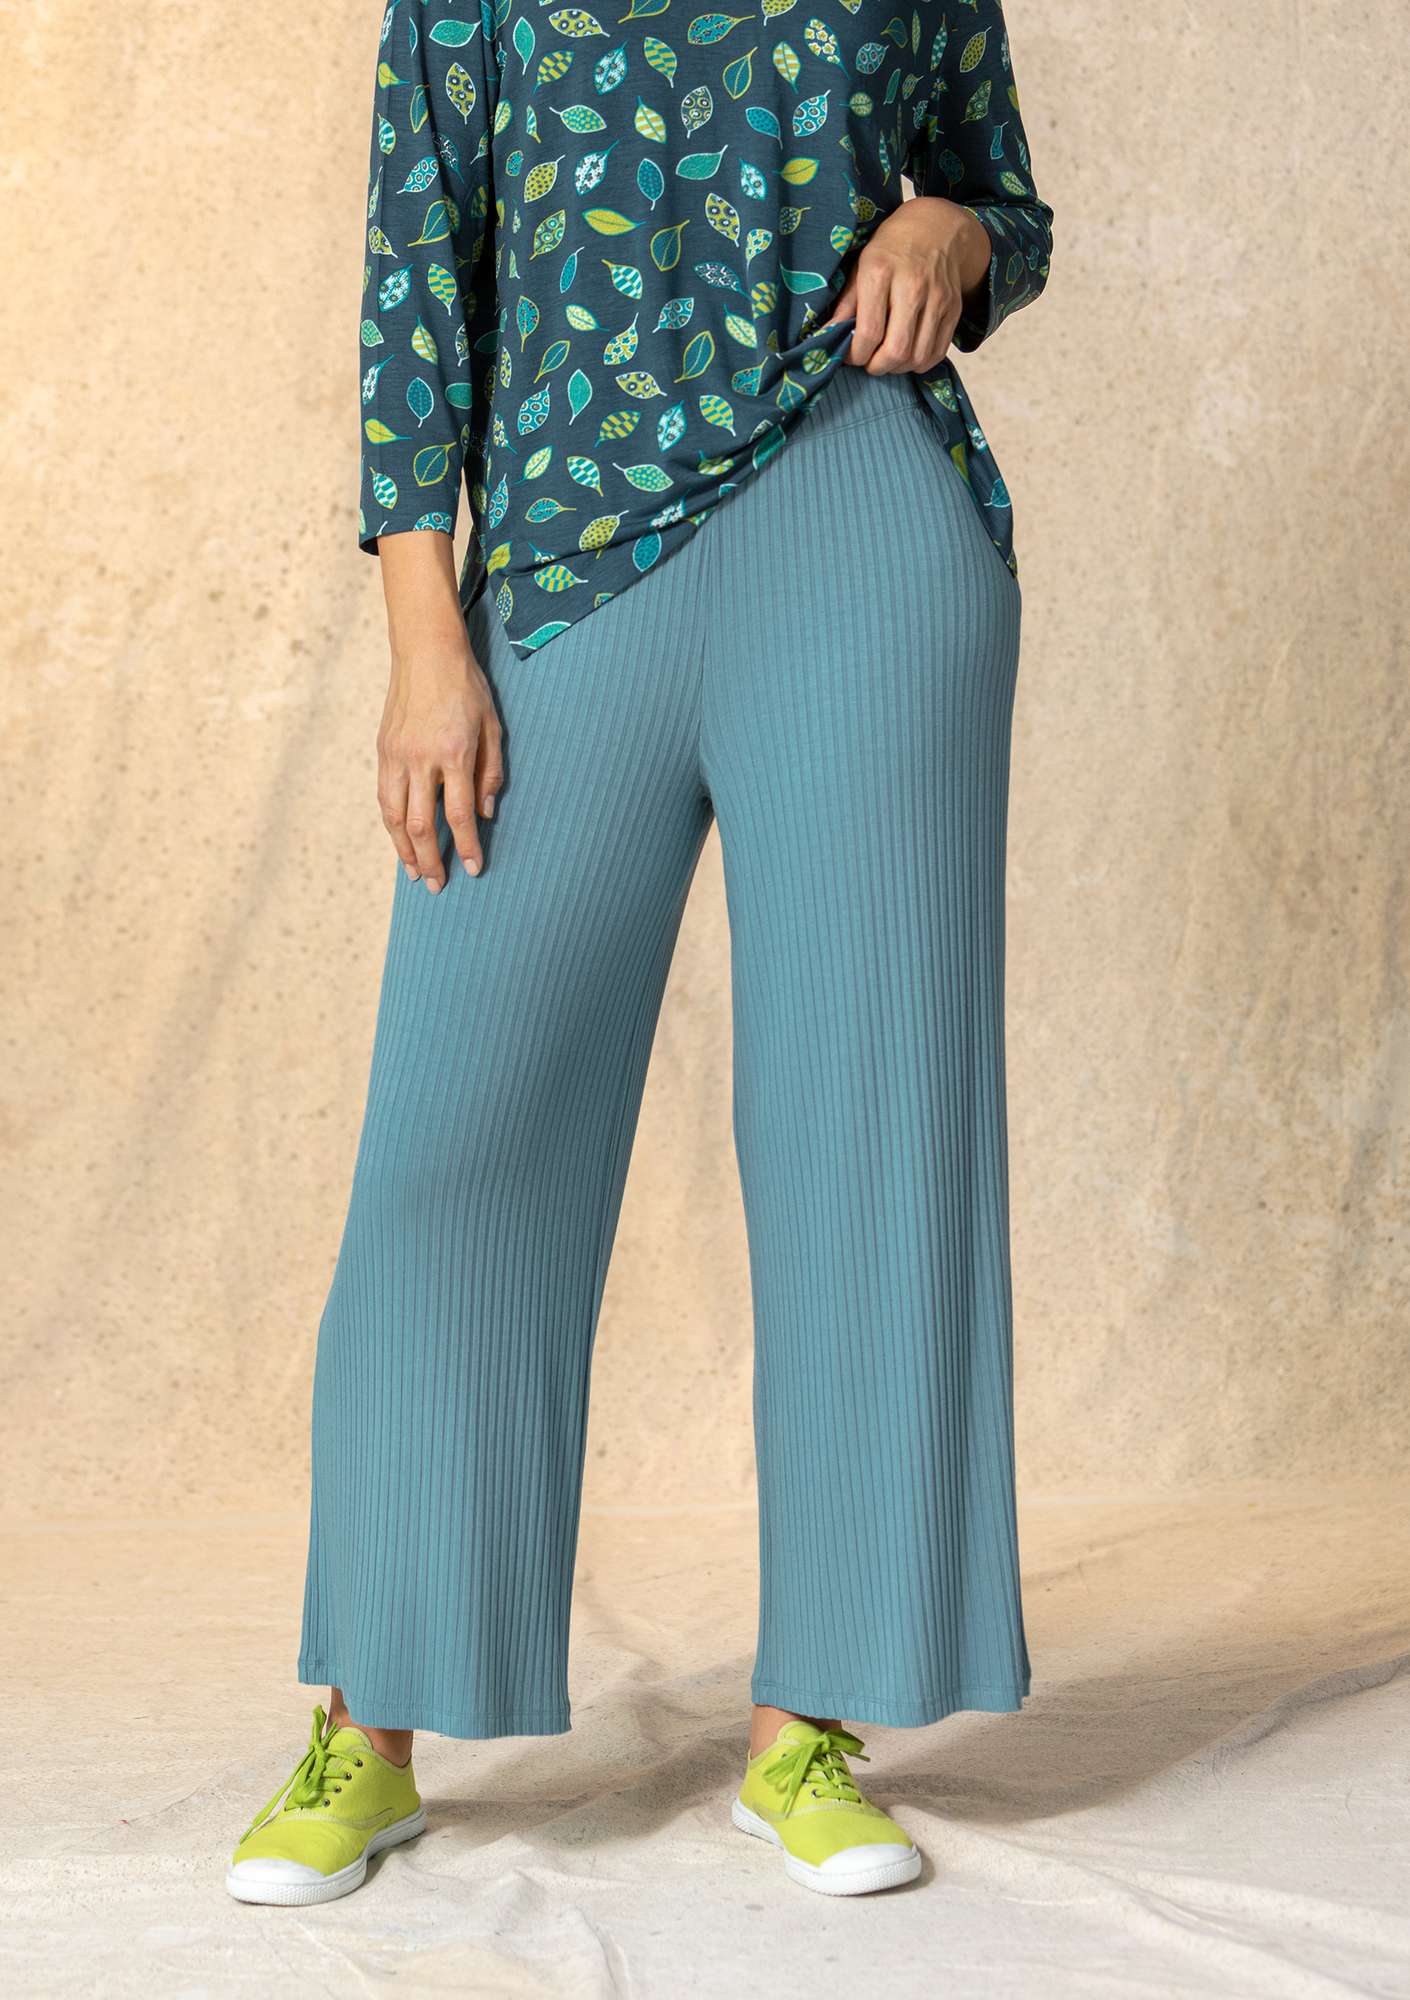 Jersey pants in bamboo viscose/spandex gray blue